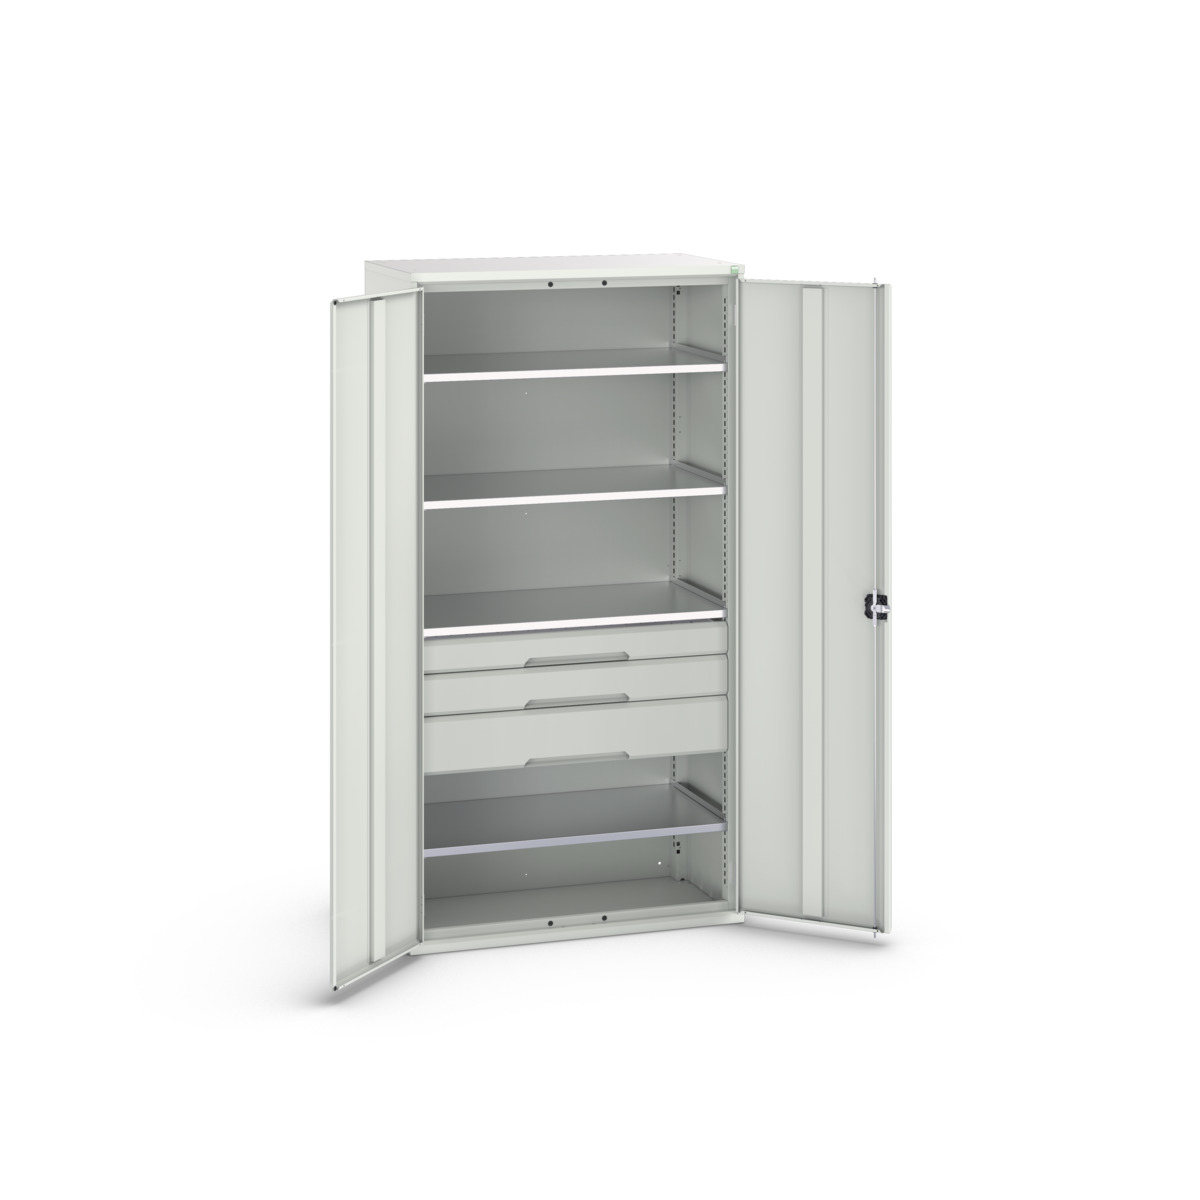 16926575.16 - verso kitted cupboard